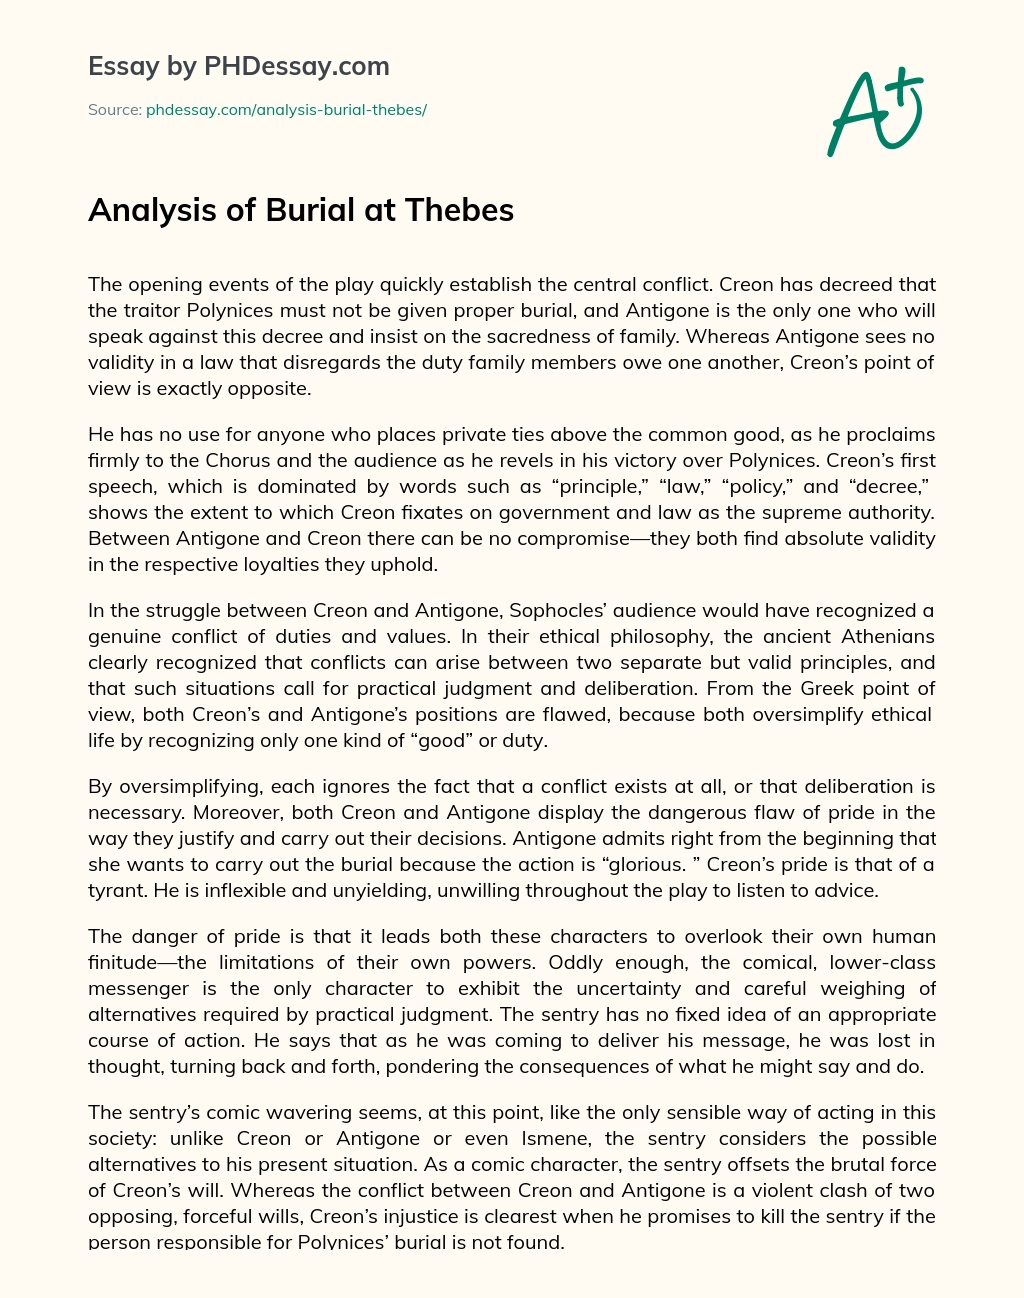 Analysis Of Burial At Thebes Phdessay Com